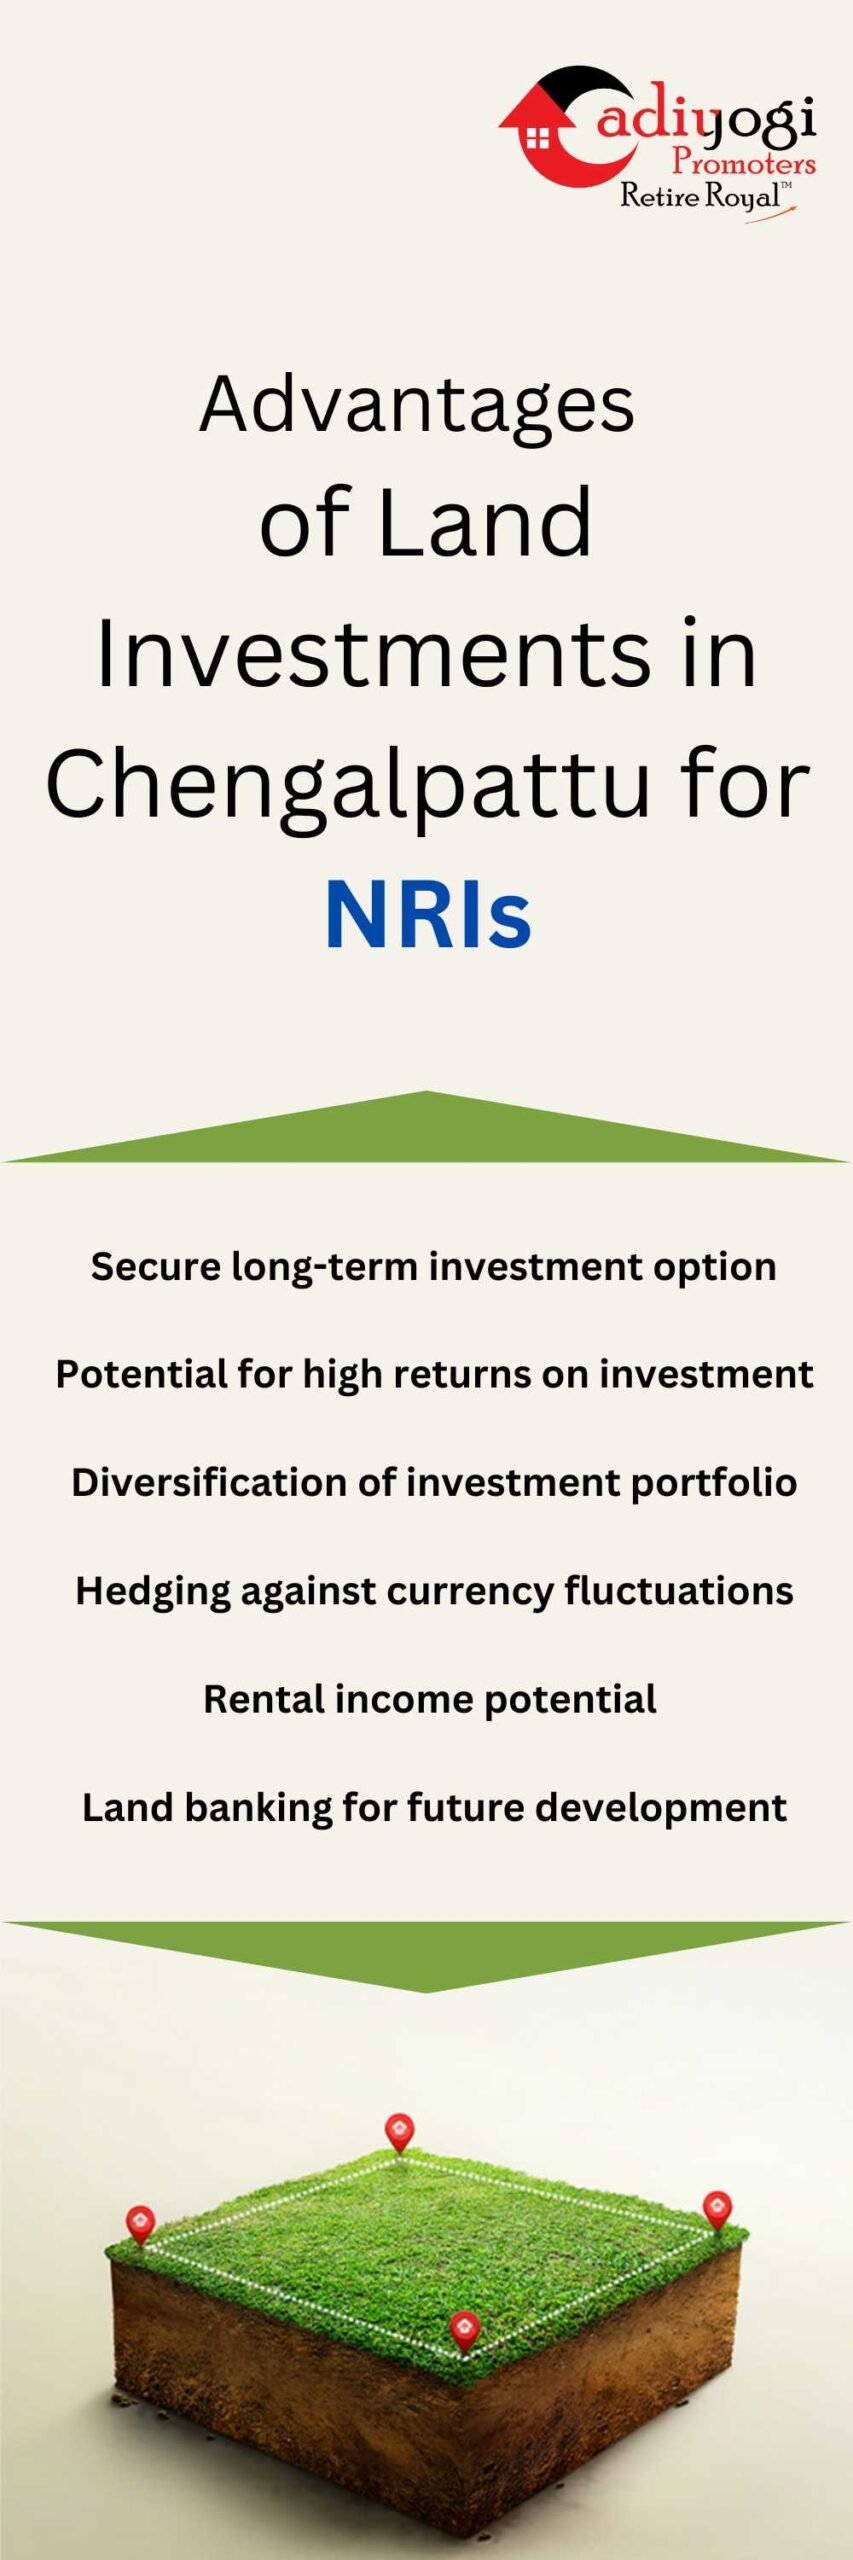 Advantages of Land Investments in Chengalpattu for NRIs (1000 × 2600 px) (1000 × 3000 px)